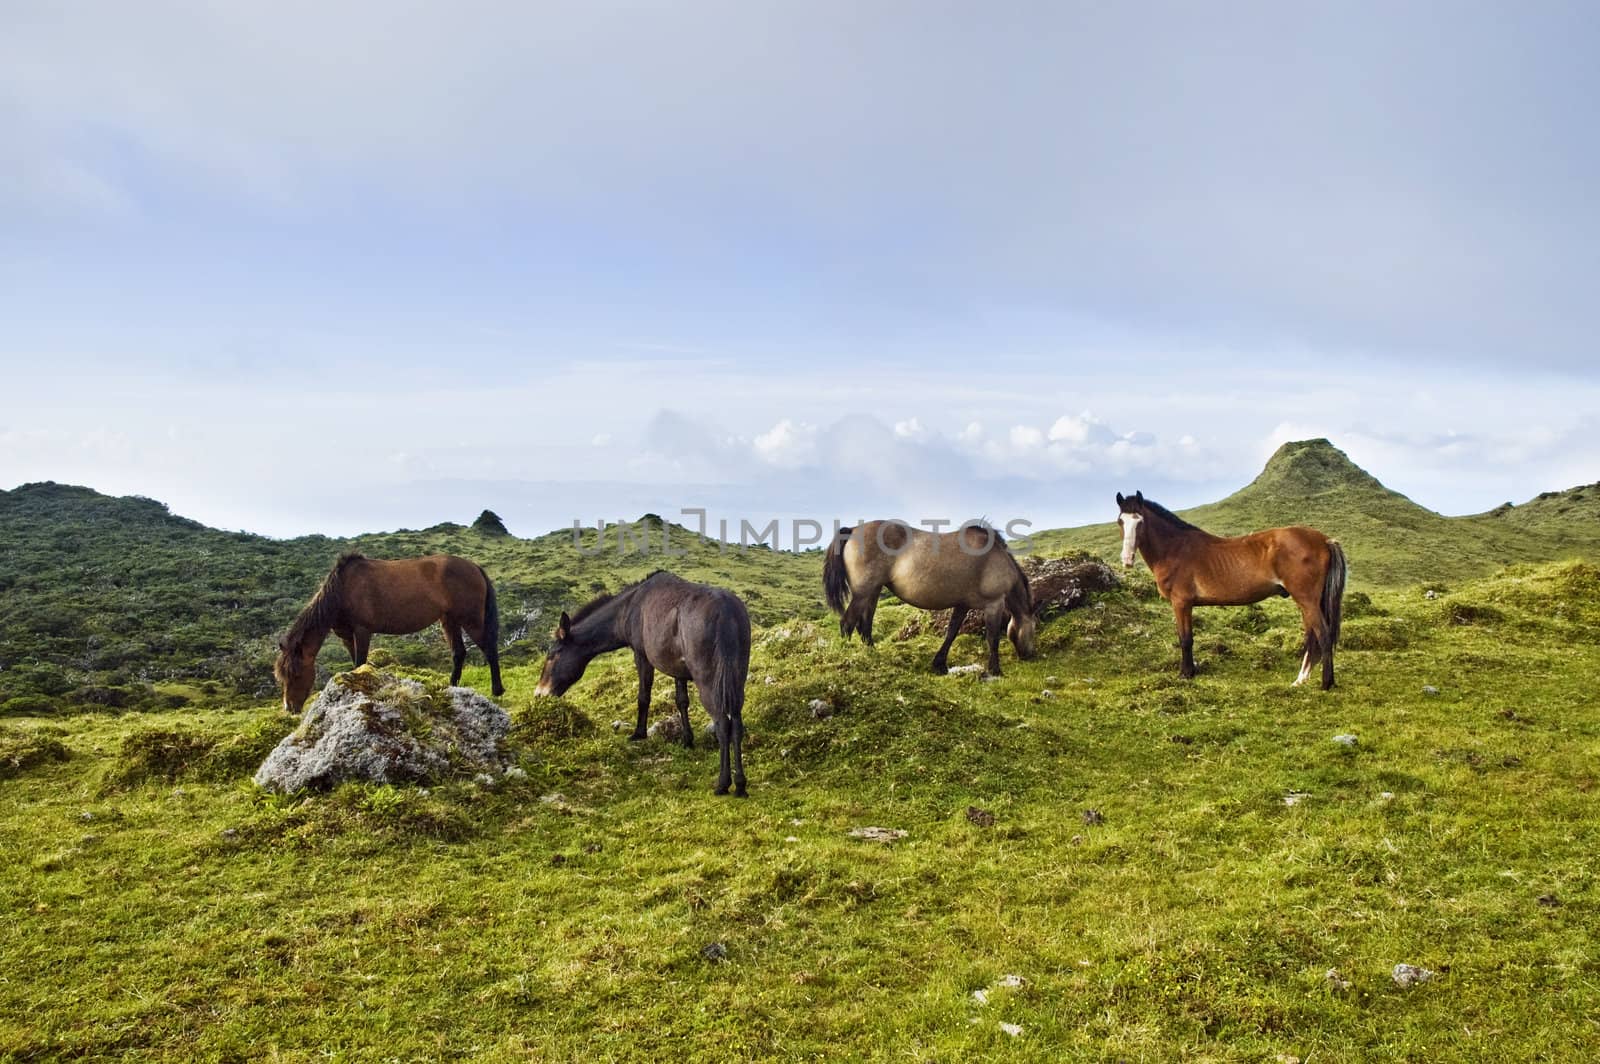 Horses grazing in Pico island, Azores by mrfotos